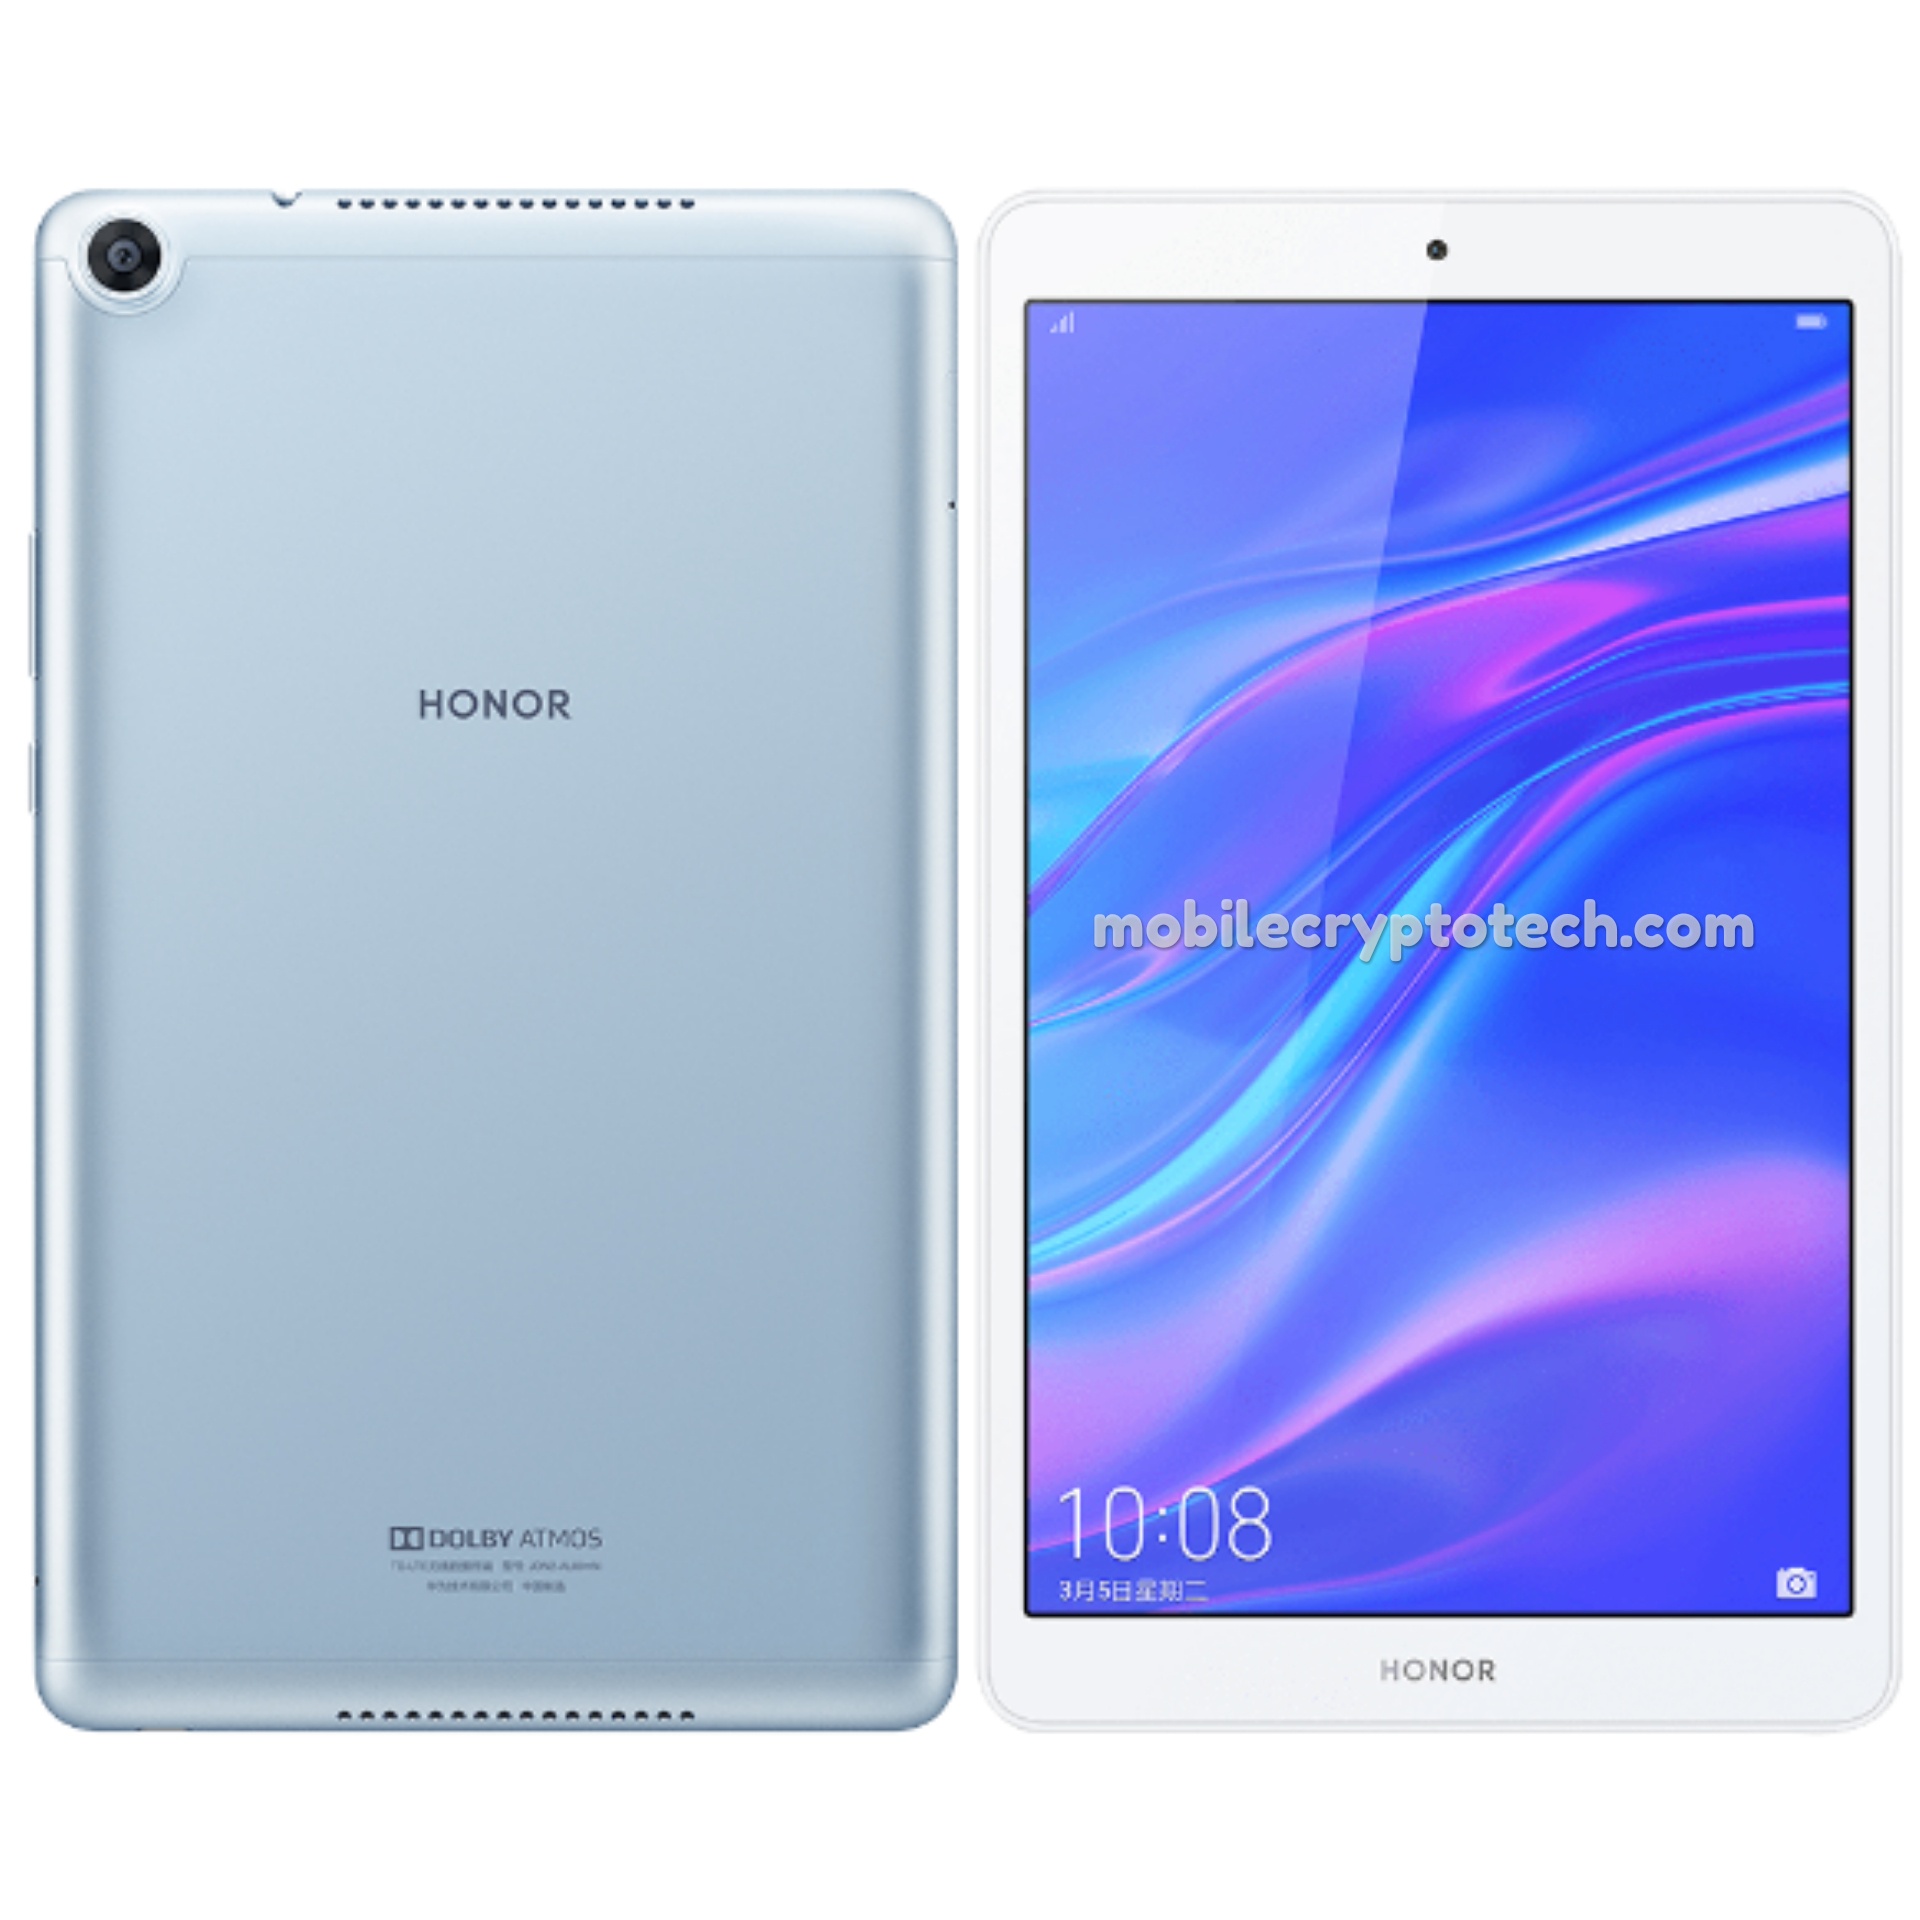 Huawei Honor Tab 5 8.0 Specifications, Video Review, Price